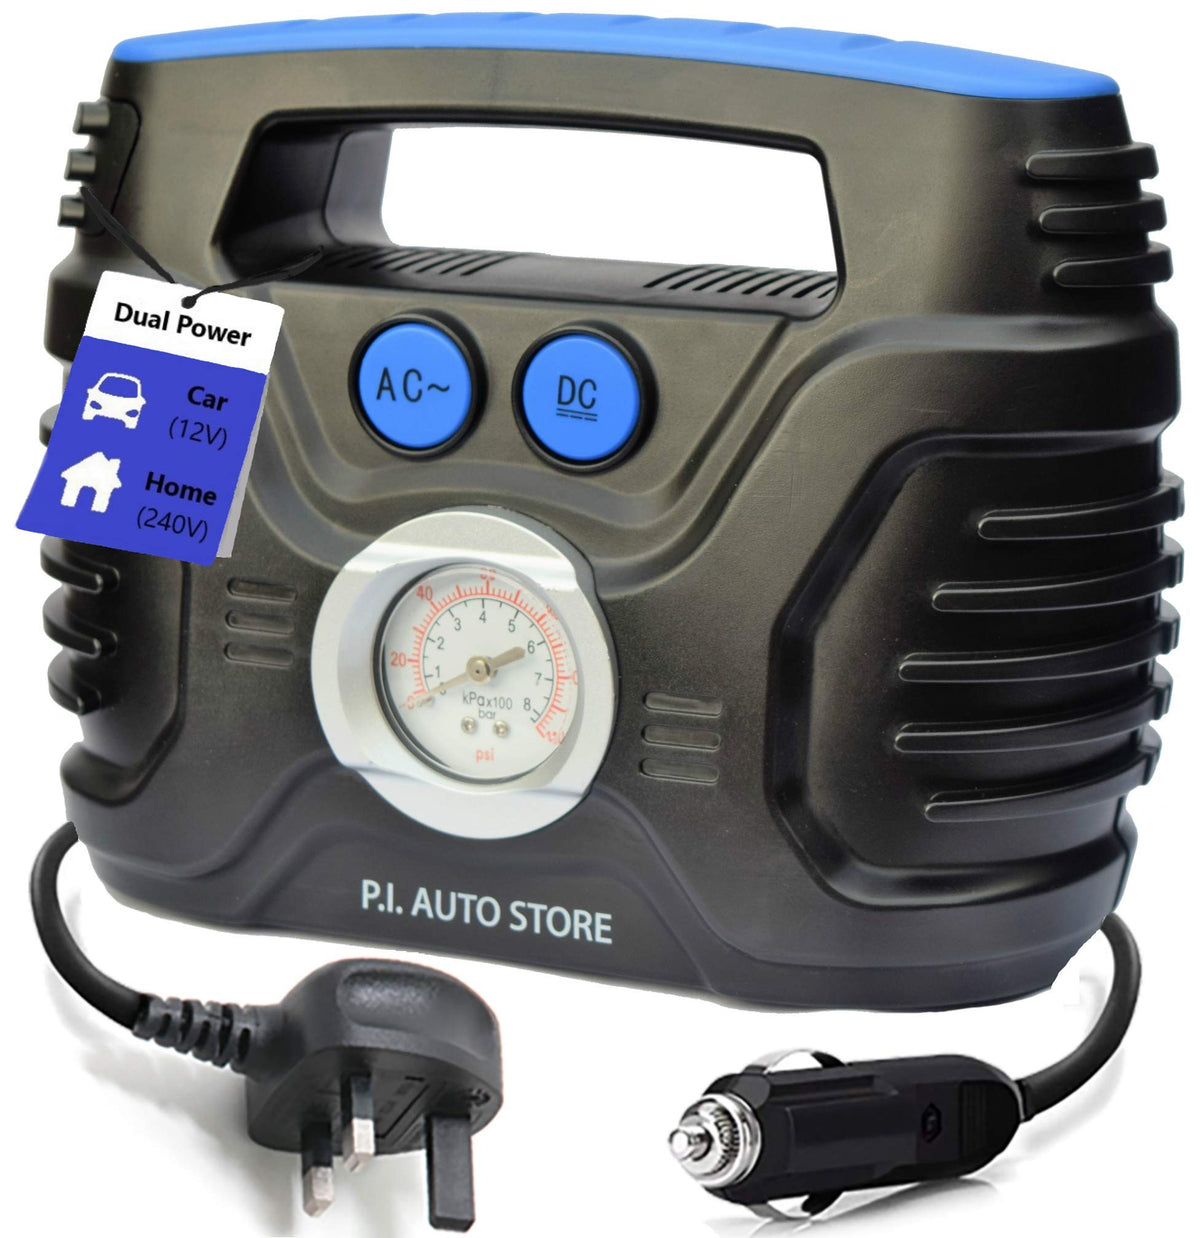 P.I. Auto Store - Tyre Pump - 240v Car Tyre Inflator (Mains) OR 12V DC Tyre Compressor (vehicle)